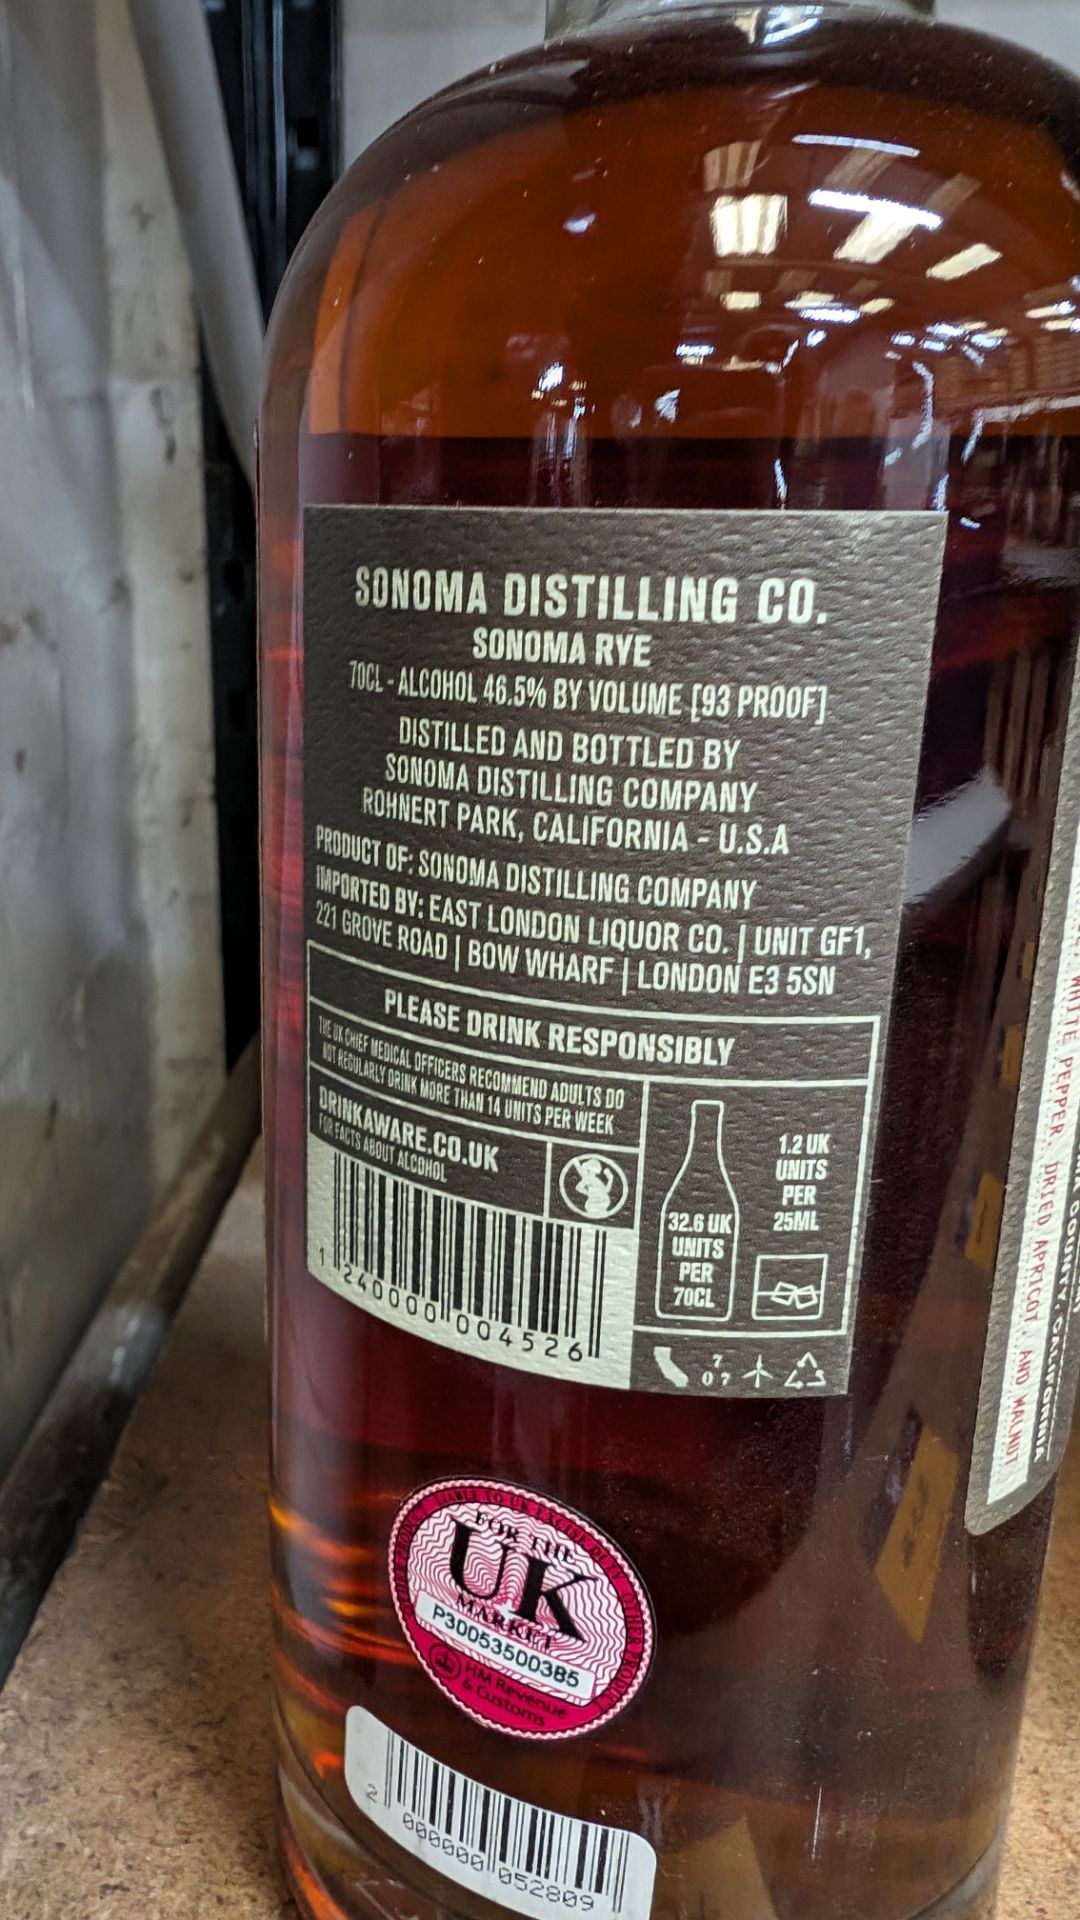 1 off 700ml bottle of Sonoma Rye Whiskey. 46.5% alc/vol (93 proof). Distilled and bottled in Sonom - Image 6 of 8